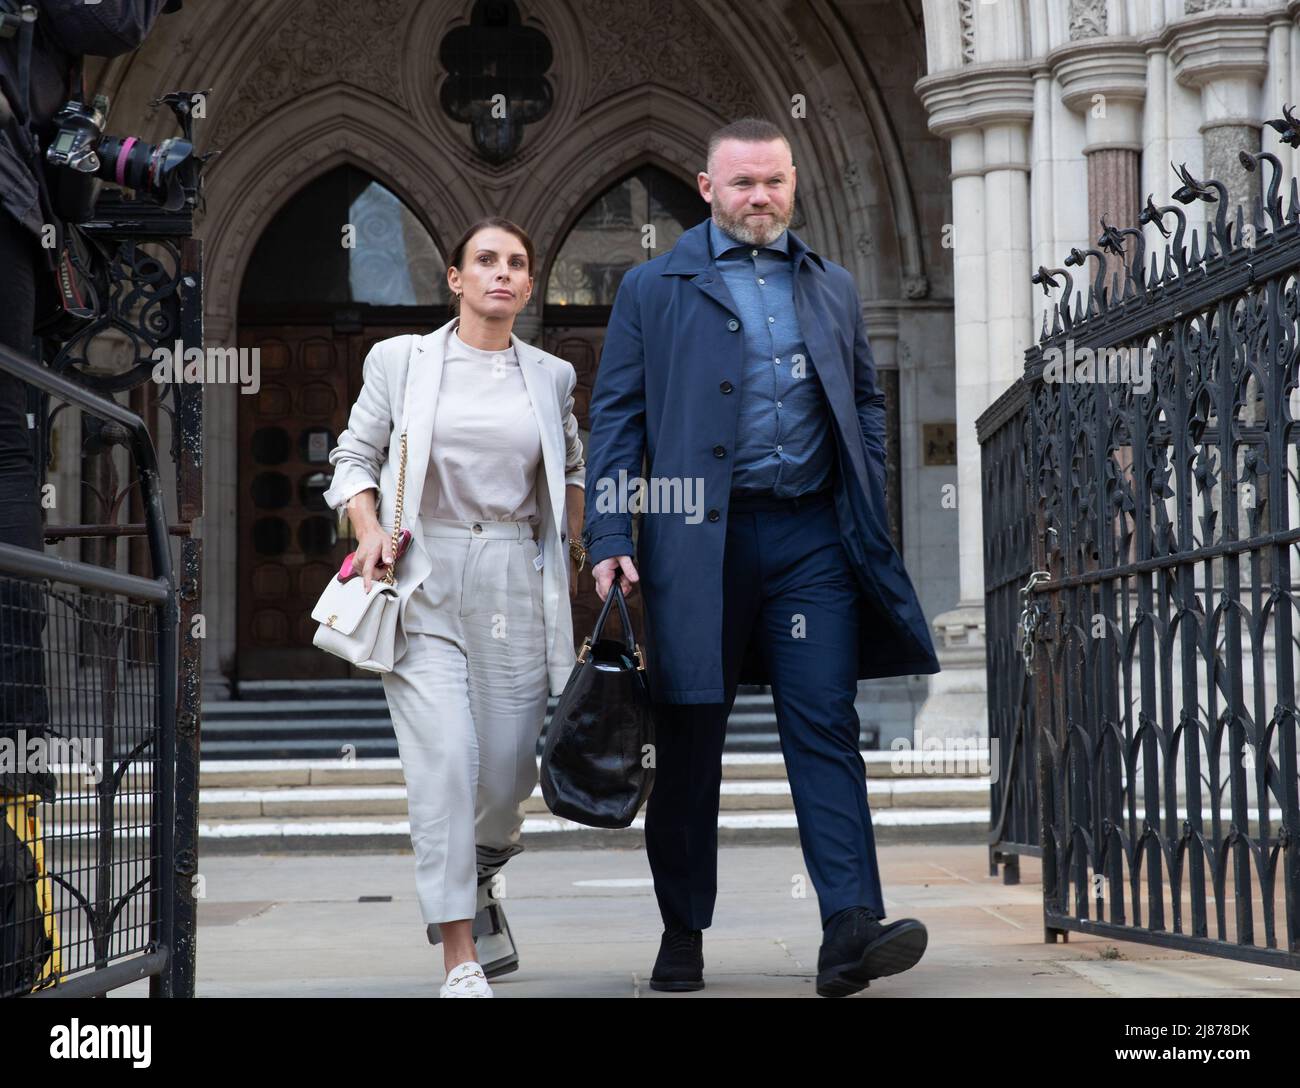 London, UK. 13th May, 2022. Coleen Rooney leaves The Royal Courts of Justice after her libel case with Rebekah Vardy, Coleen Rooney who is the wife of Derby County manager and former England football player Wayne Rooney, and Rebekah Vardy, wife of Leicester City striker Jamie Vardy are locked in a libel battle also known as the 'Wagatha Christie' trial after accusations that Mrs Vardy leaked false stories about Mrs Rooney to the press. Credit: Lucy North/Alamy Live News Stock Photo